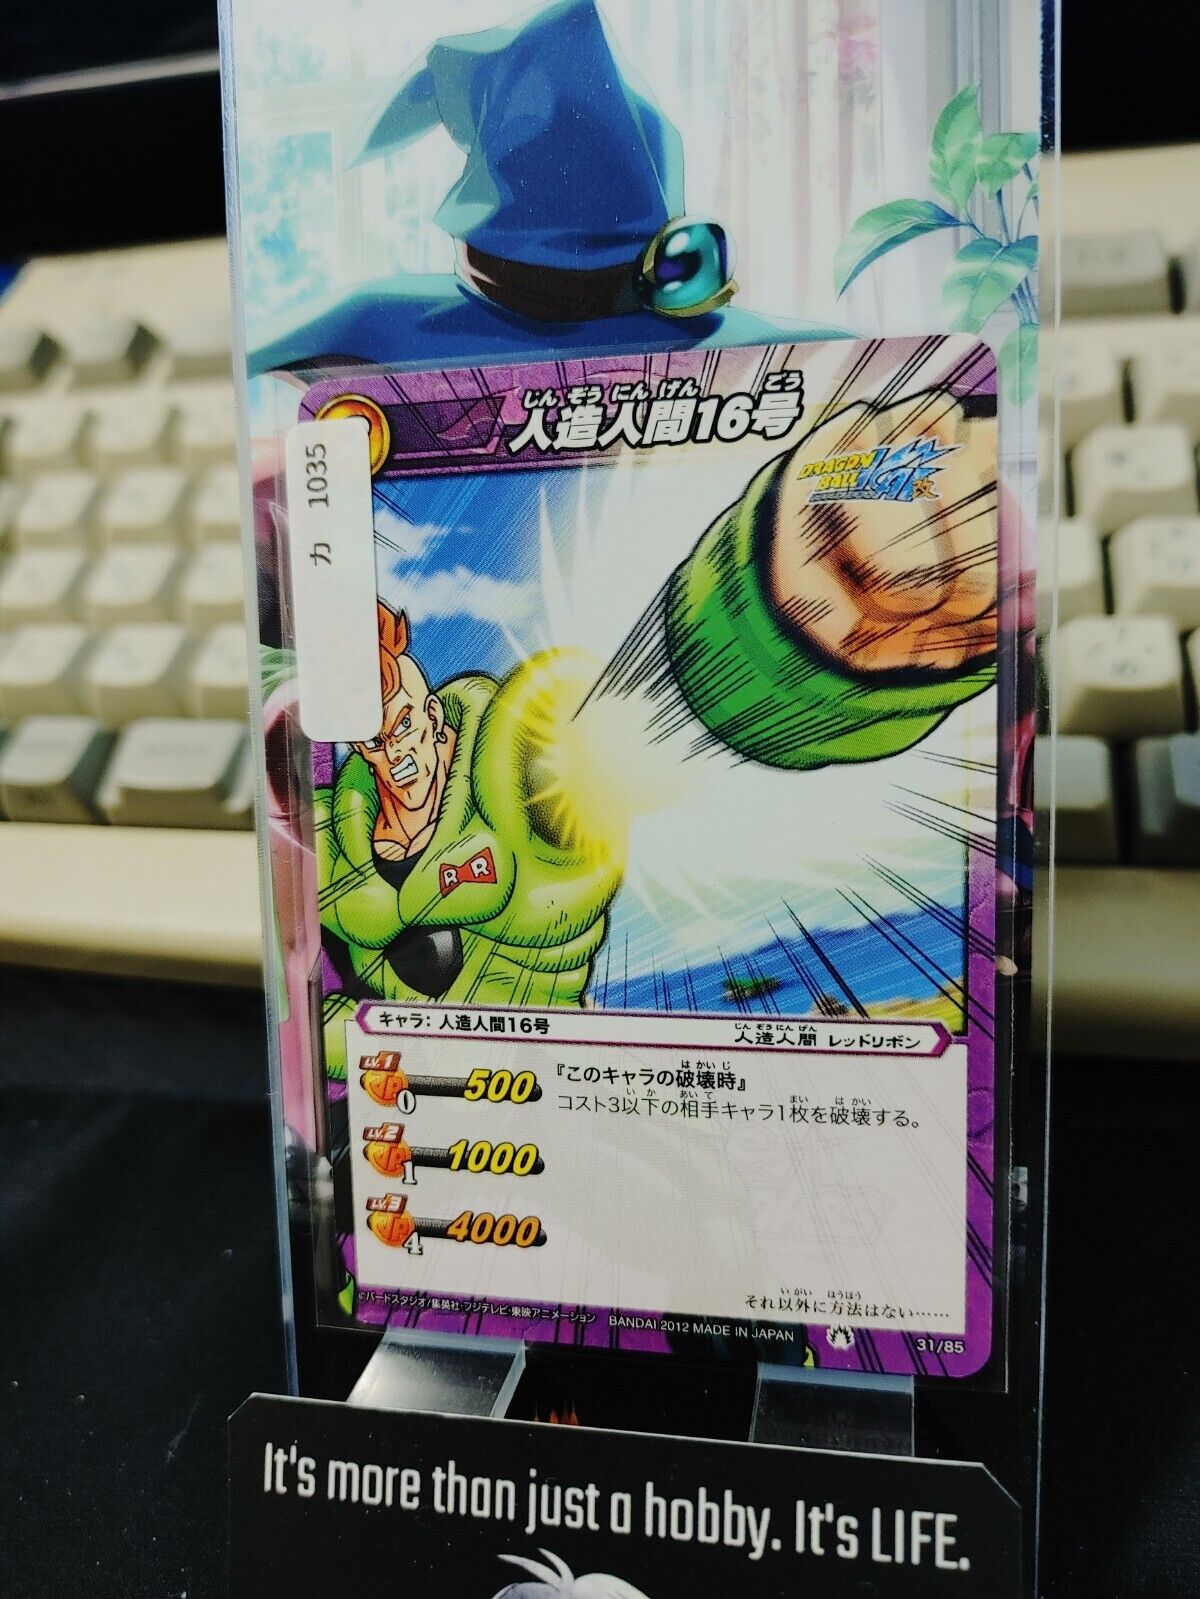 Dragon Ball Z Bandai Carddass Miracle Battle Android 16 31/85 Japanese Vintage